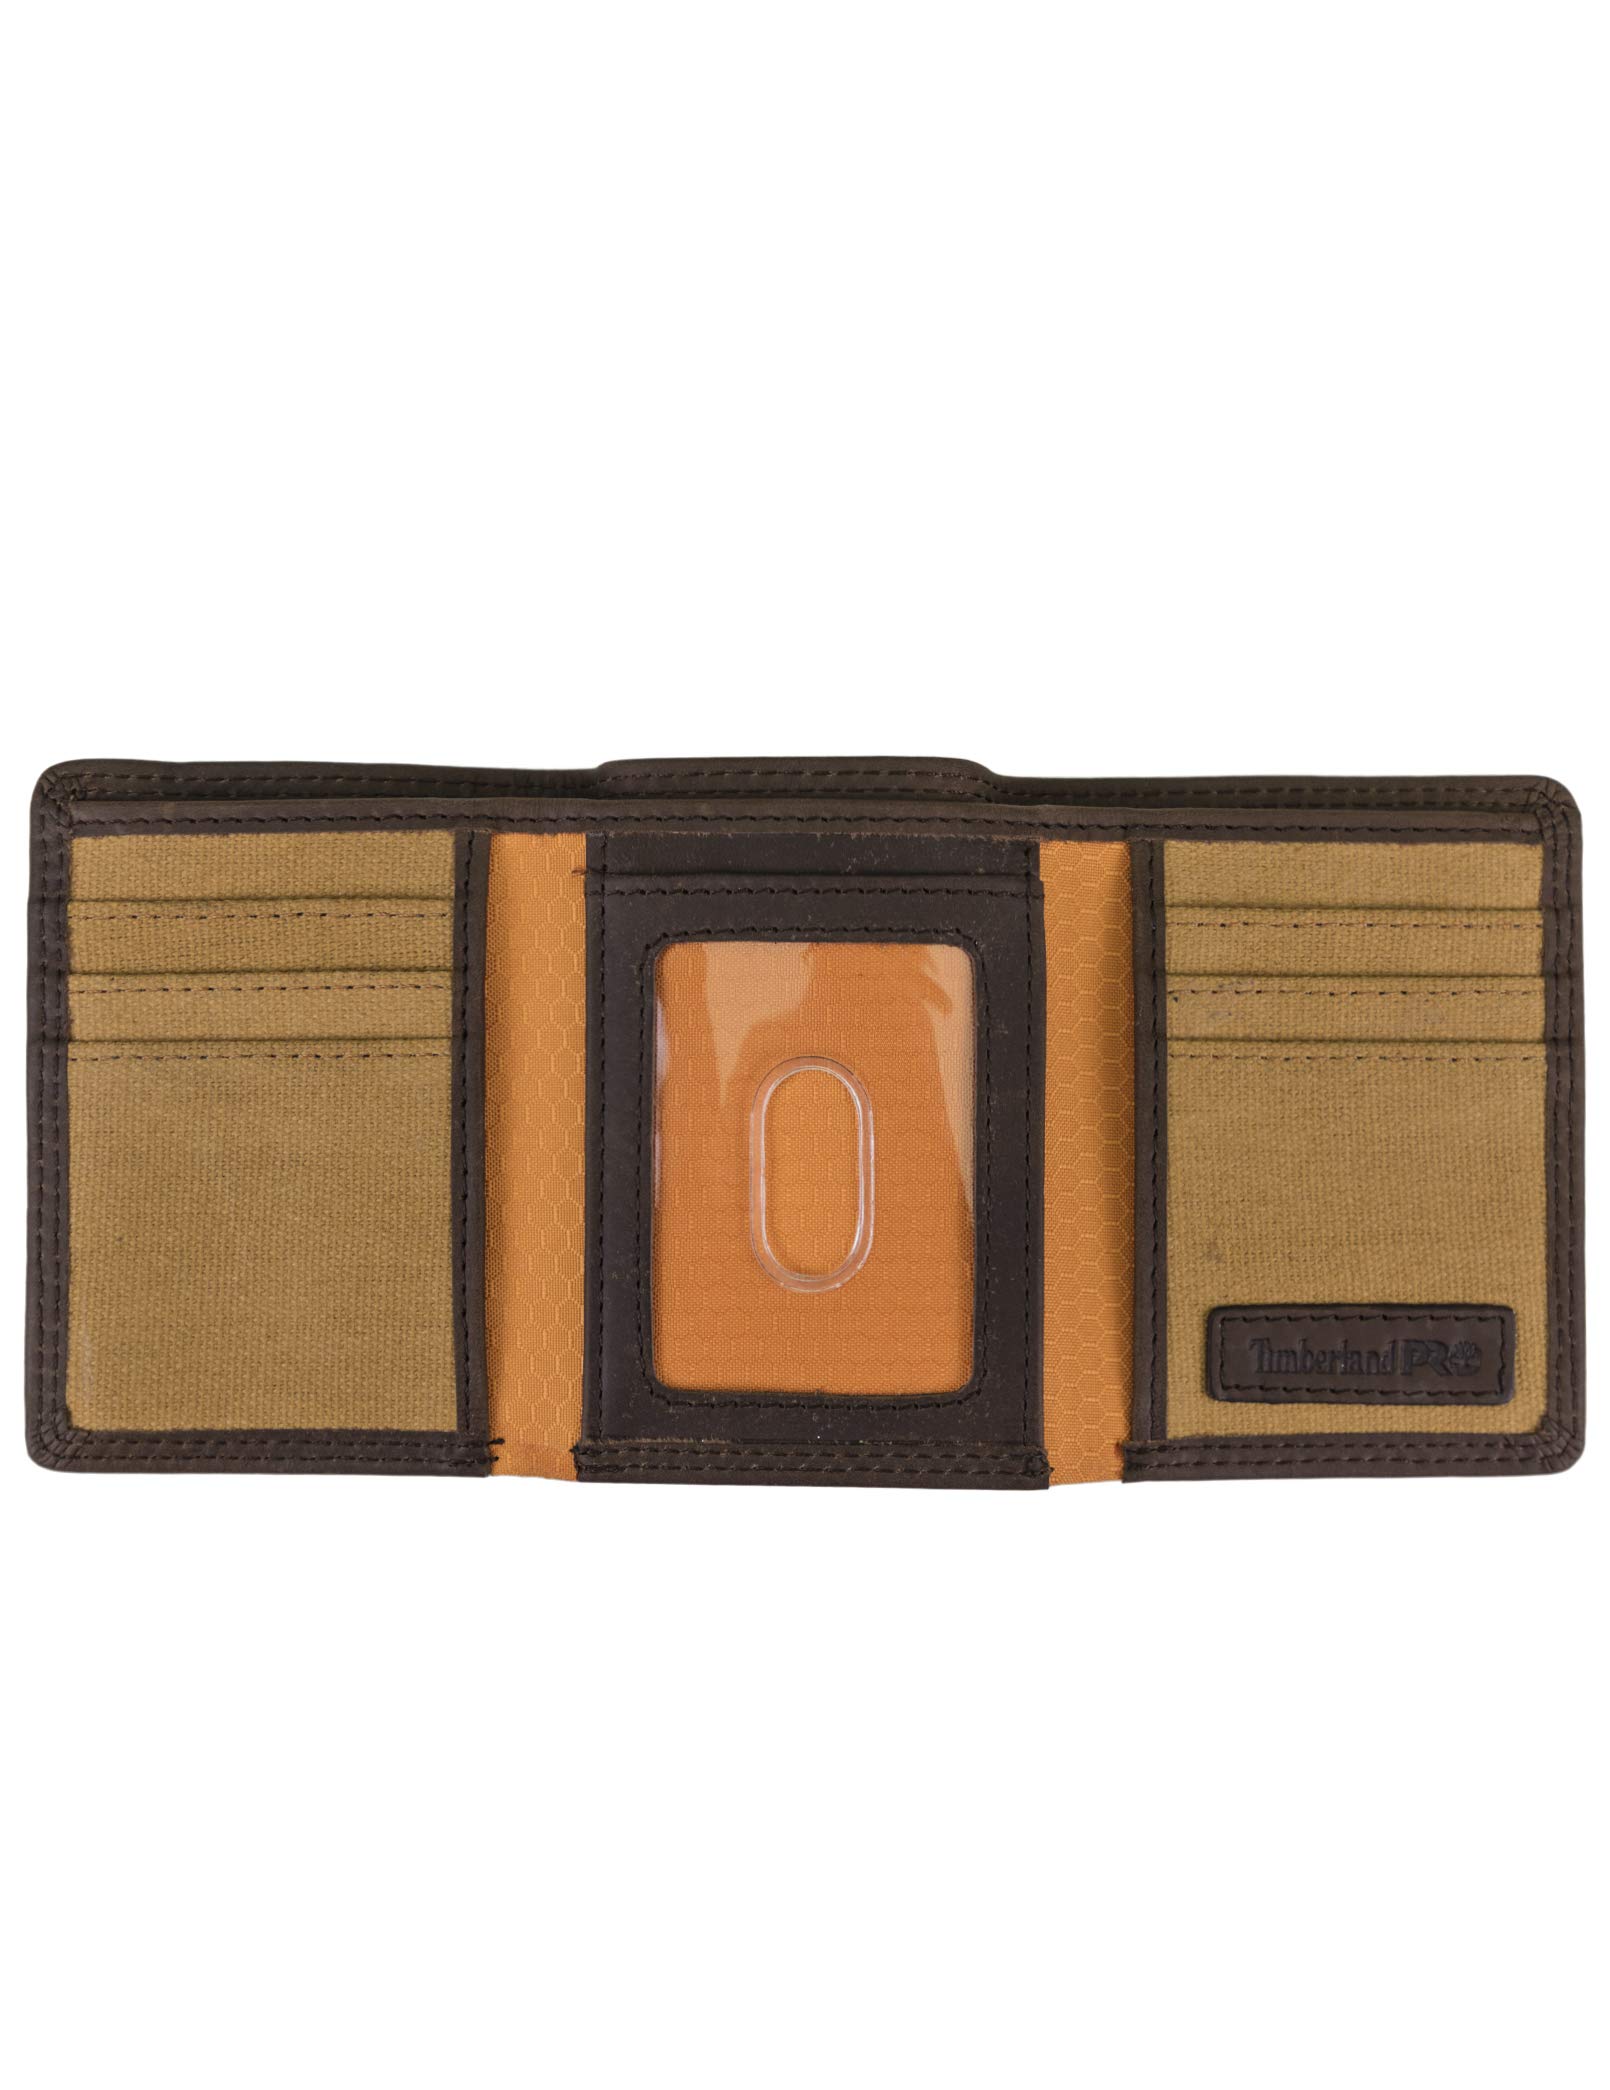 Timberland PRO Men's Leather RFID Trifold Wallet with ID Window, Dark Brown/Pullman, One Size